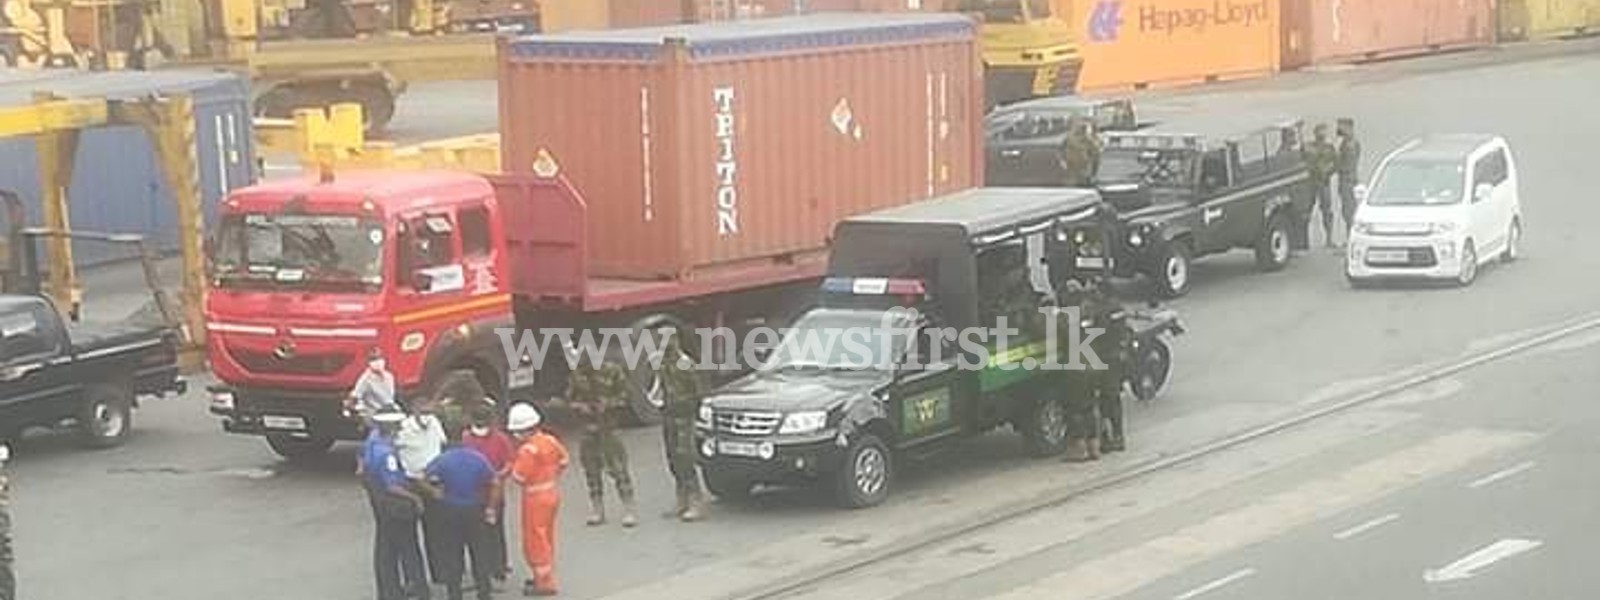 Customs clarifies armed escort video; says radioactive material was re-exported